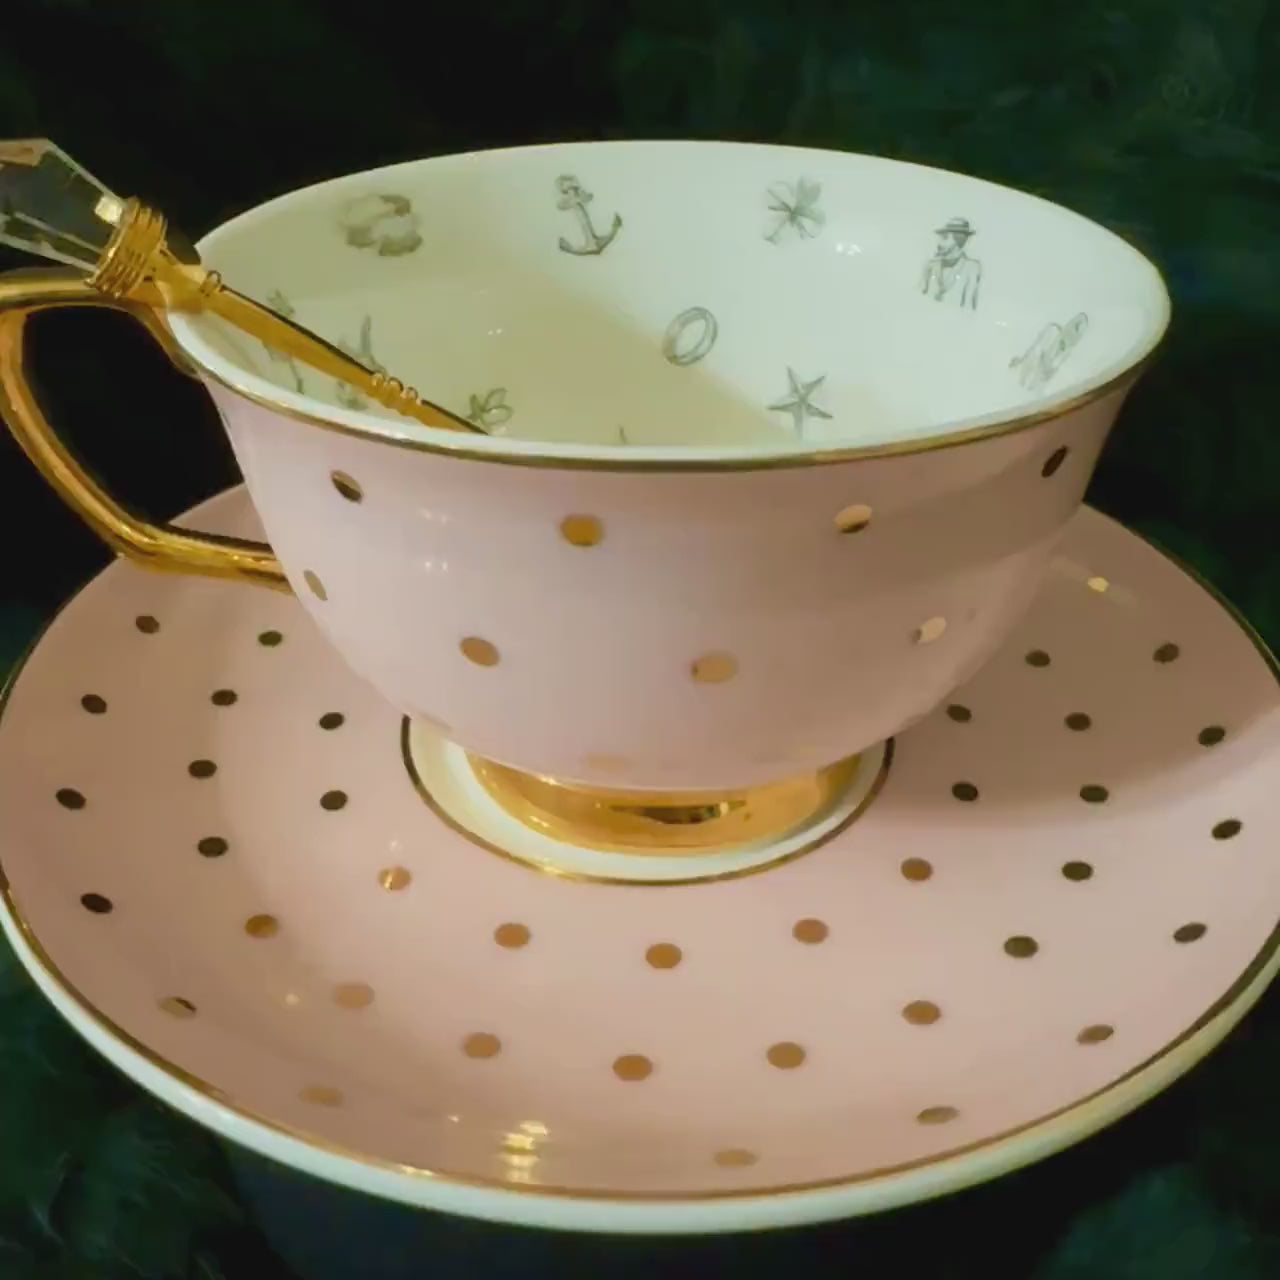 Pale pink and gold polka dot Tea cup and saucer set. Fortune teller teacup. Tea leaf reading kit with FREE course.